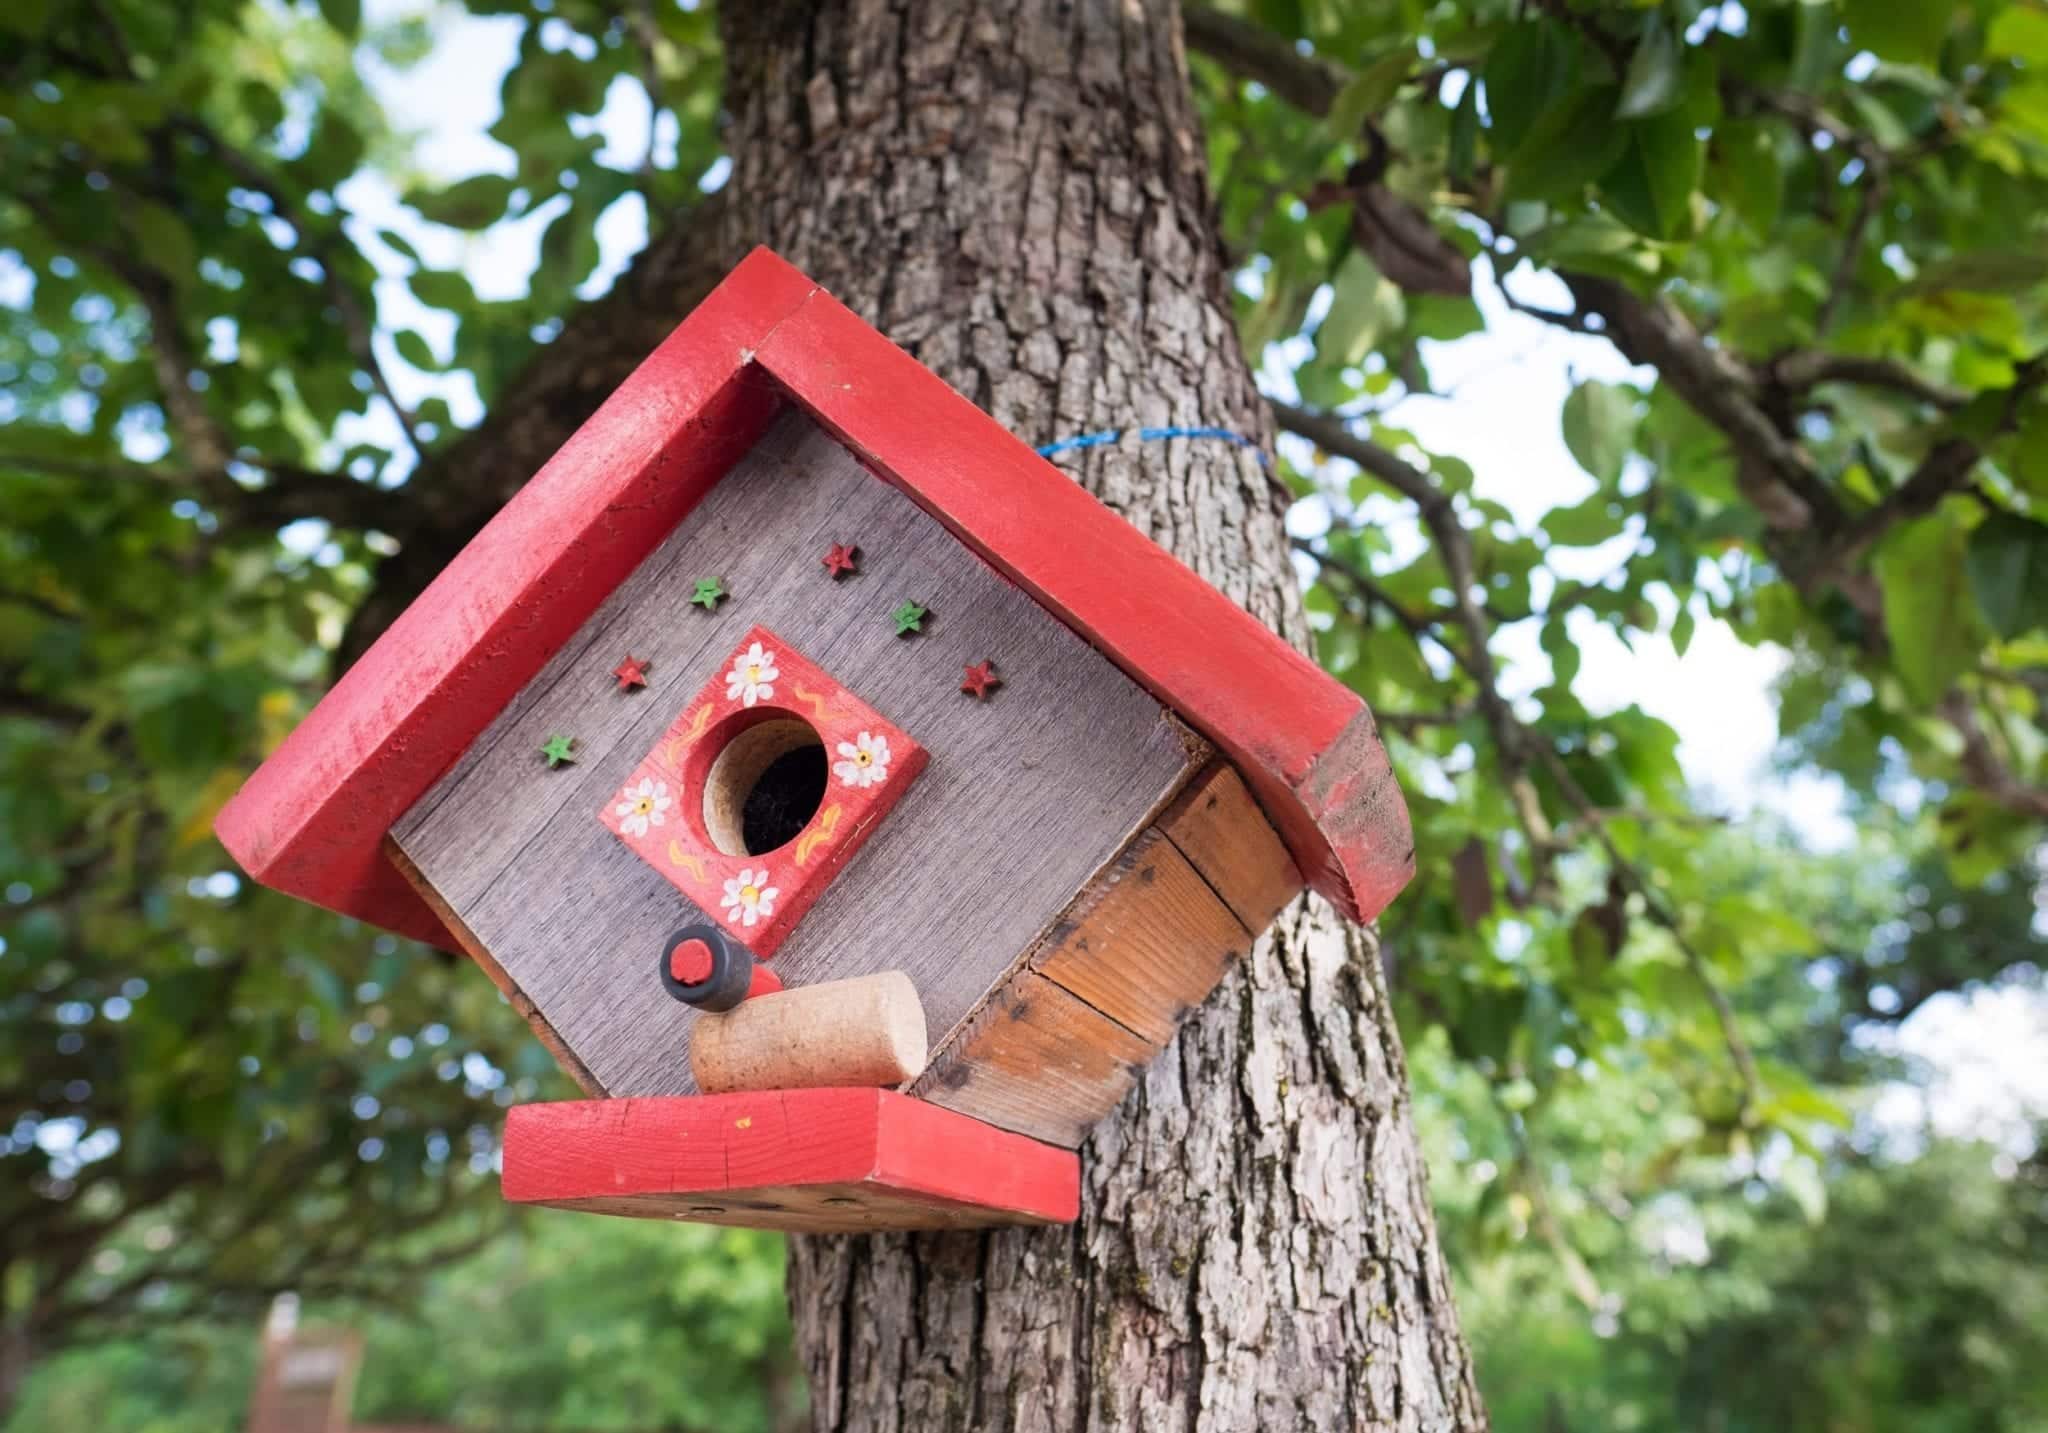 A small wooden birdhouse with bright red trim hammered to a tree in Georgia.